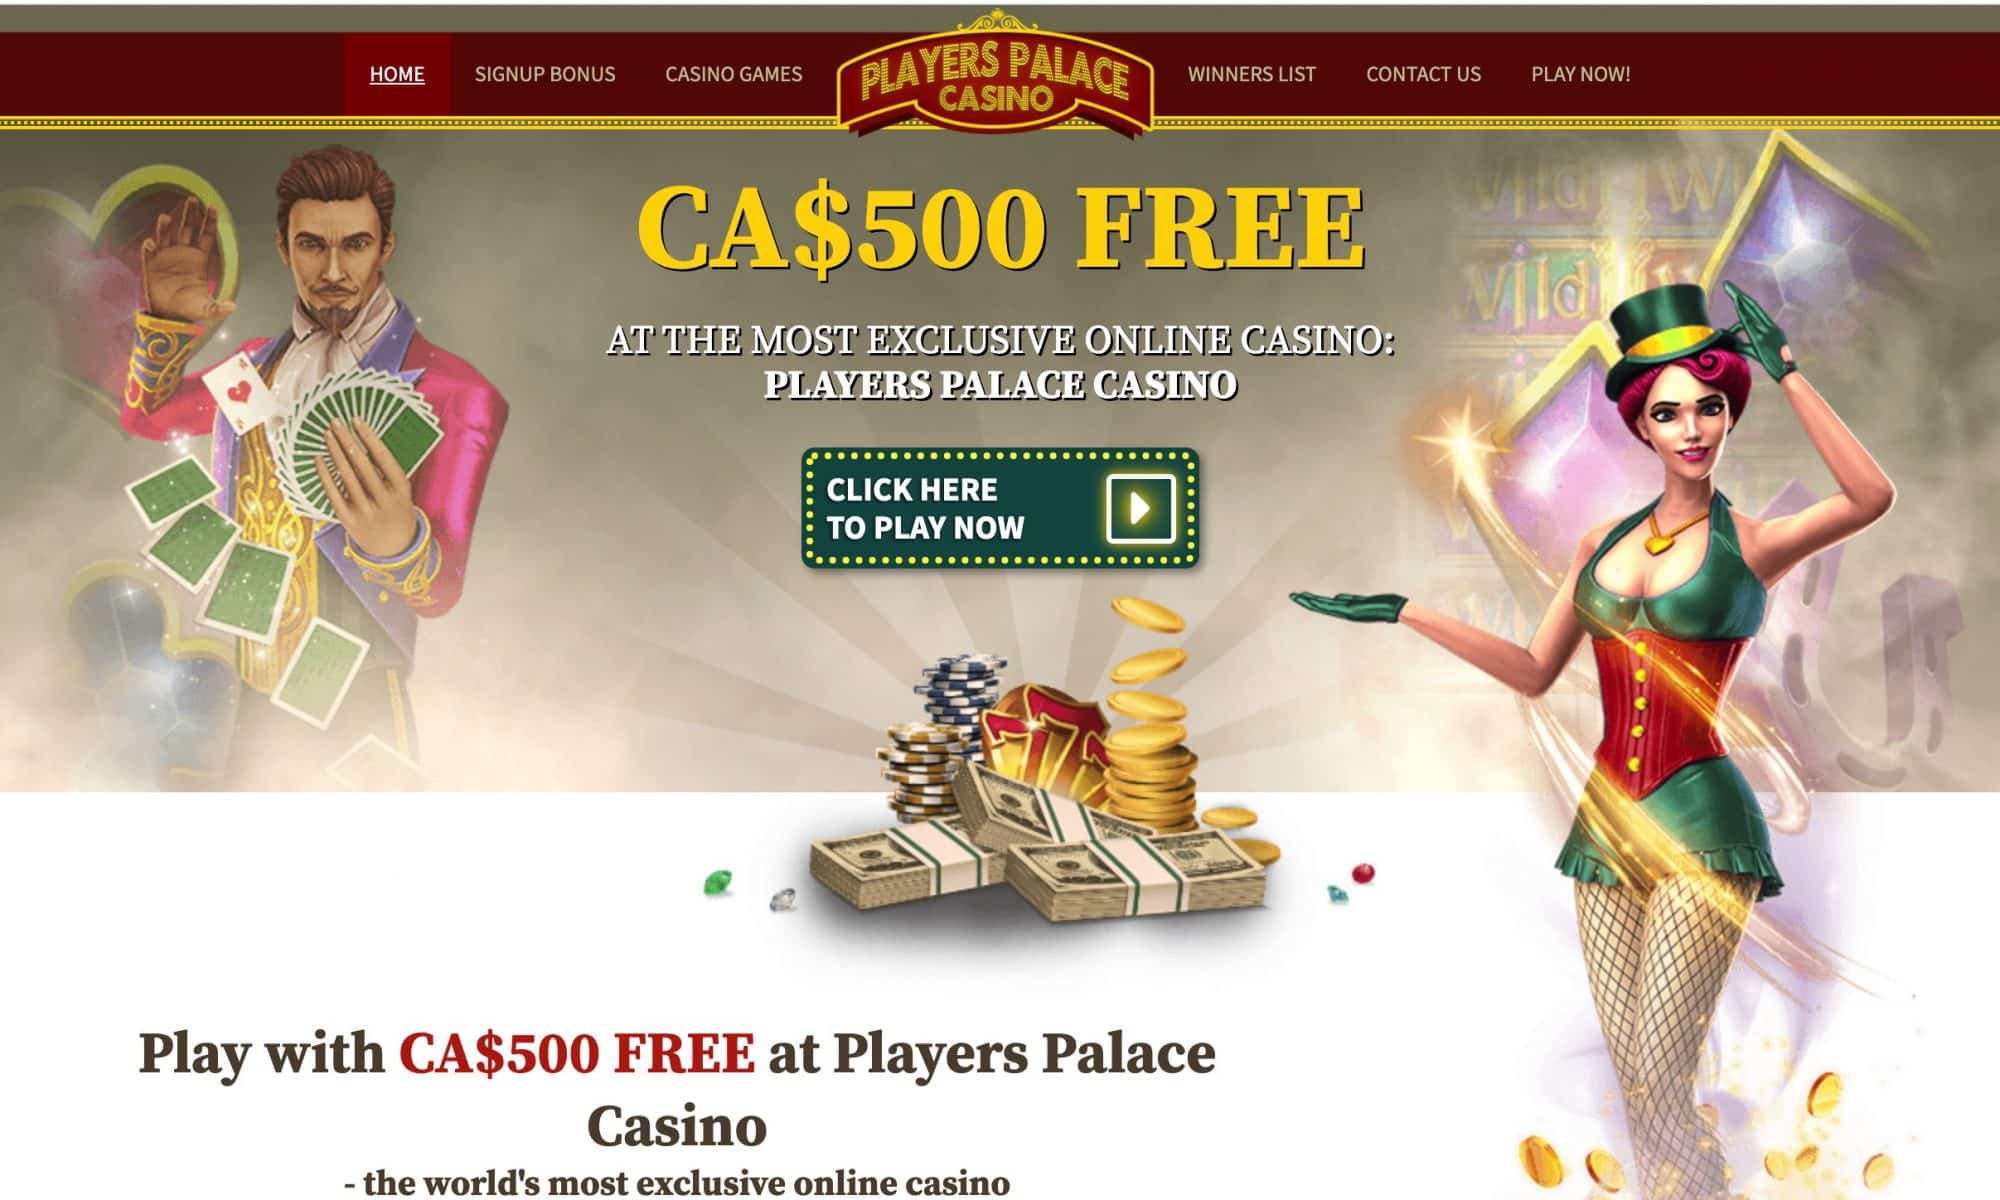 Players Palace Casino - Claim up to $500 free in welcome bonuses!